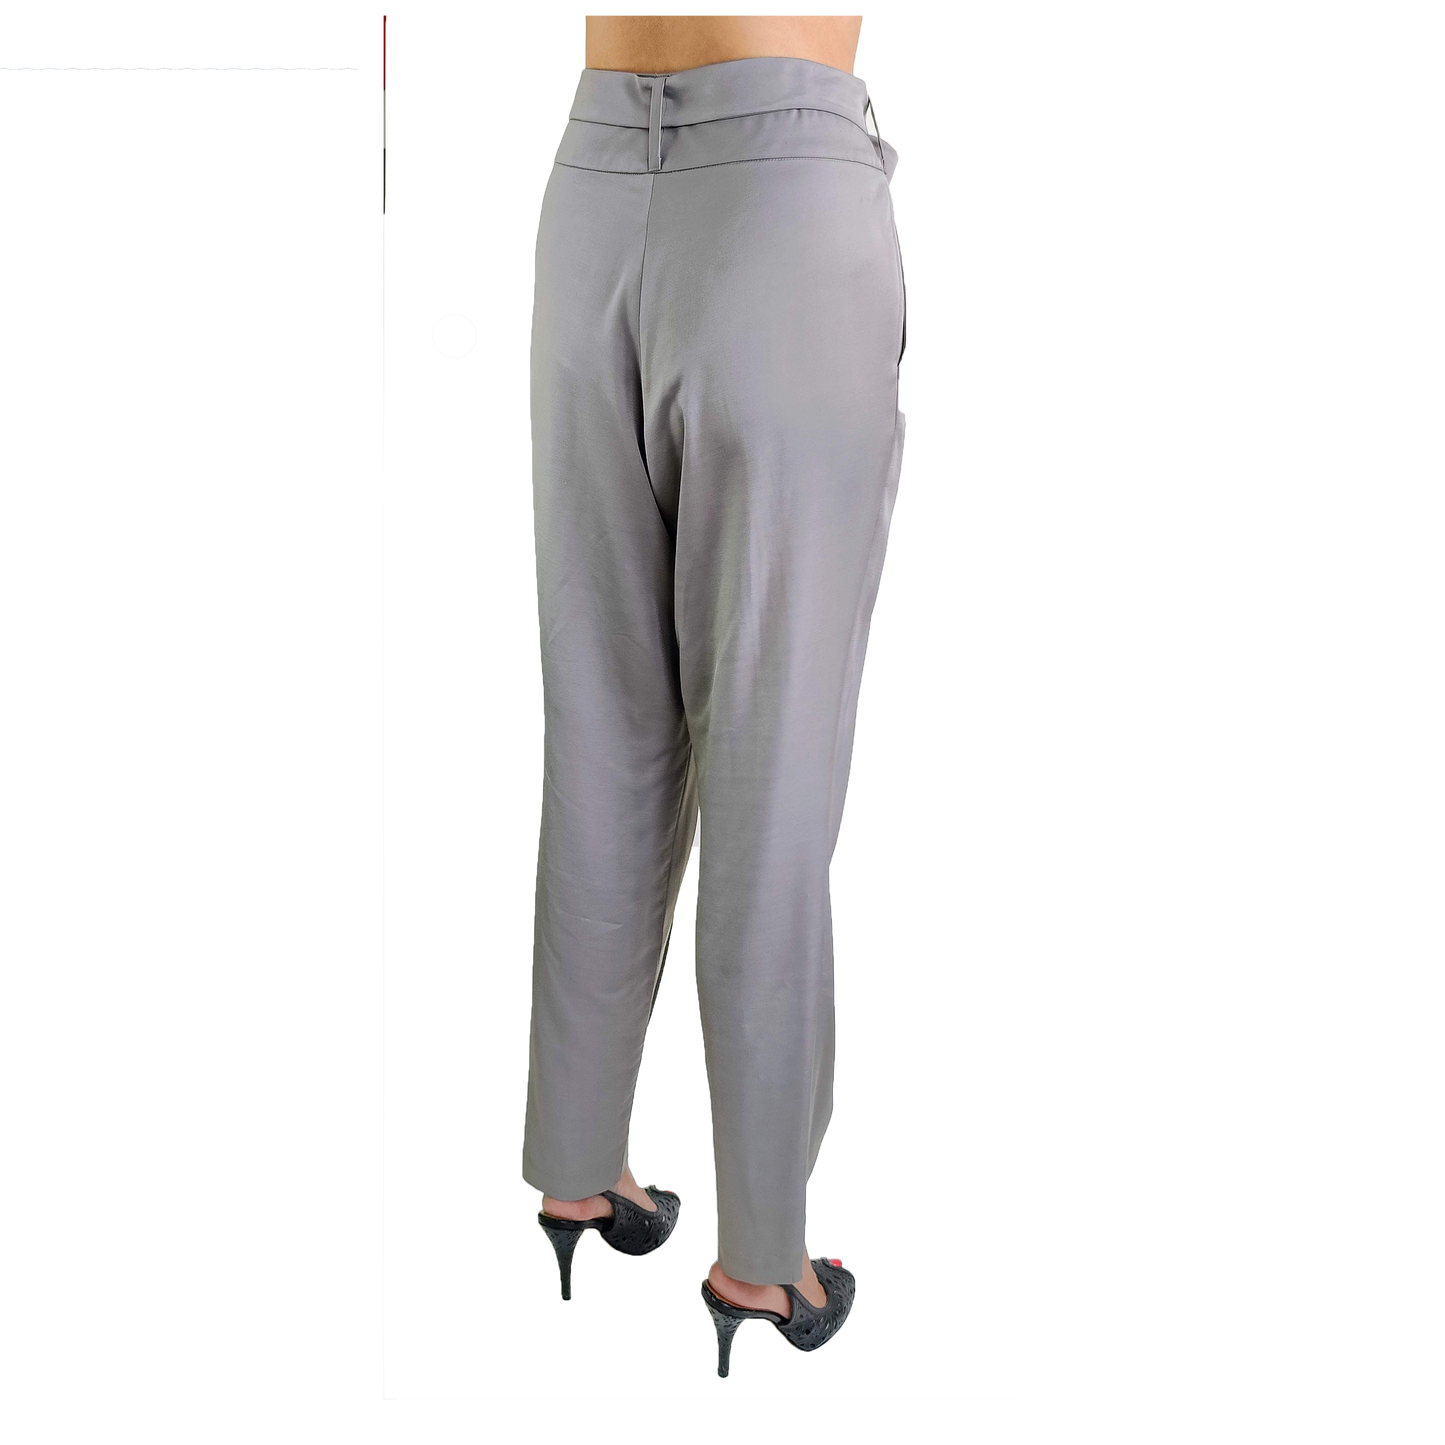 Back of gray low crotch pant in draping cotton viscose satin, including an optional tie belt